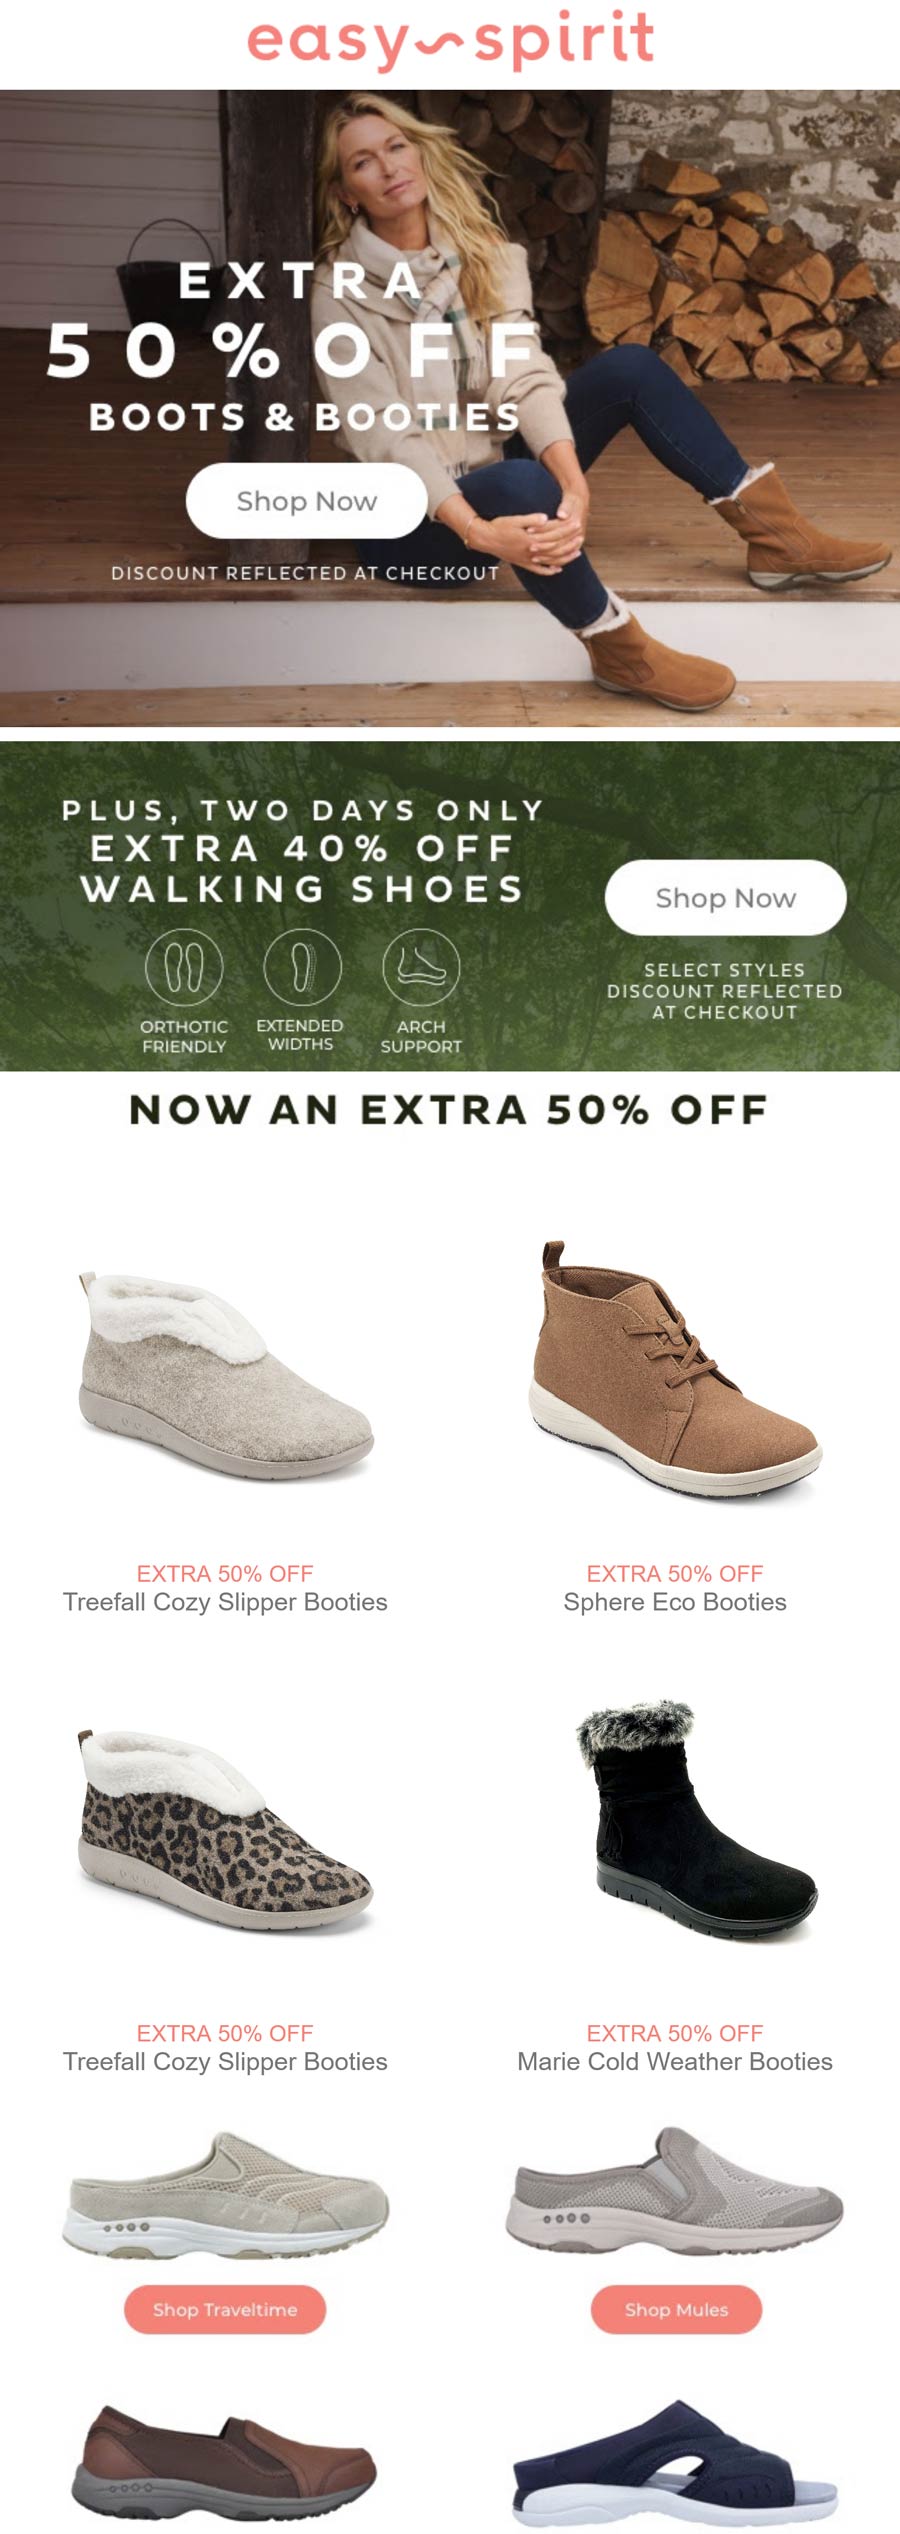 Easy Spirit stores Coupon  40% off walking shoes & extra 50% off boots at Easy Spirit #easyspirit 